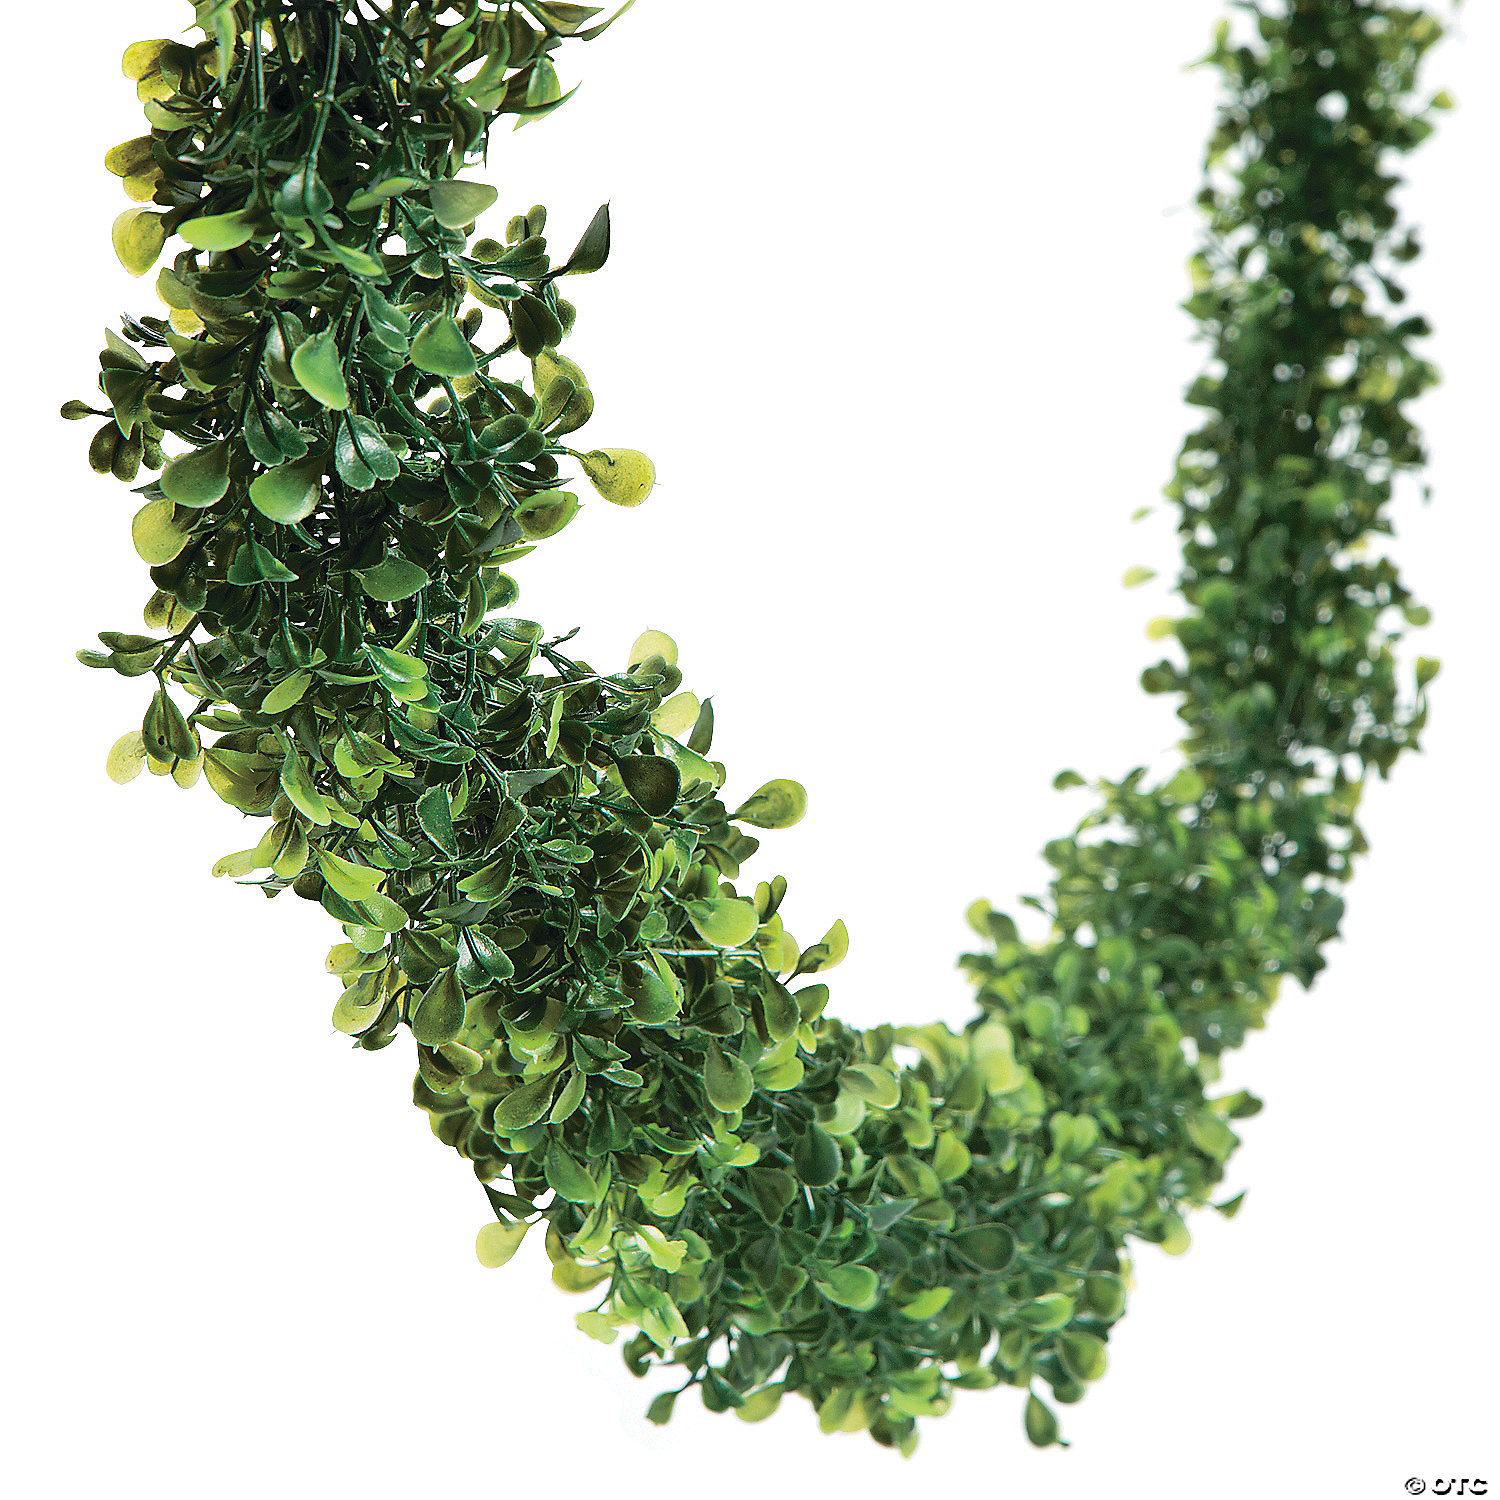 2 Green 22 in Wreaths Artificial Boxwood and Fern Leaves Candle Rings